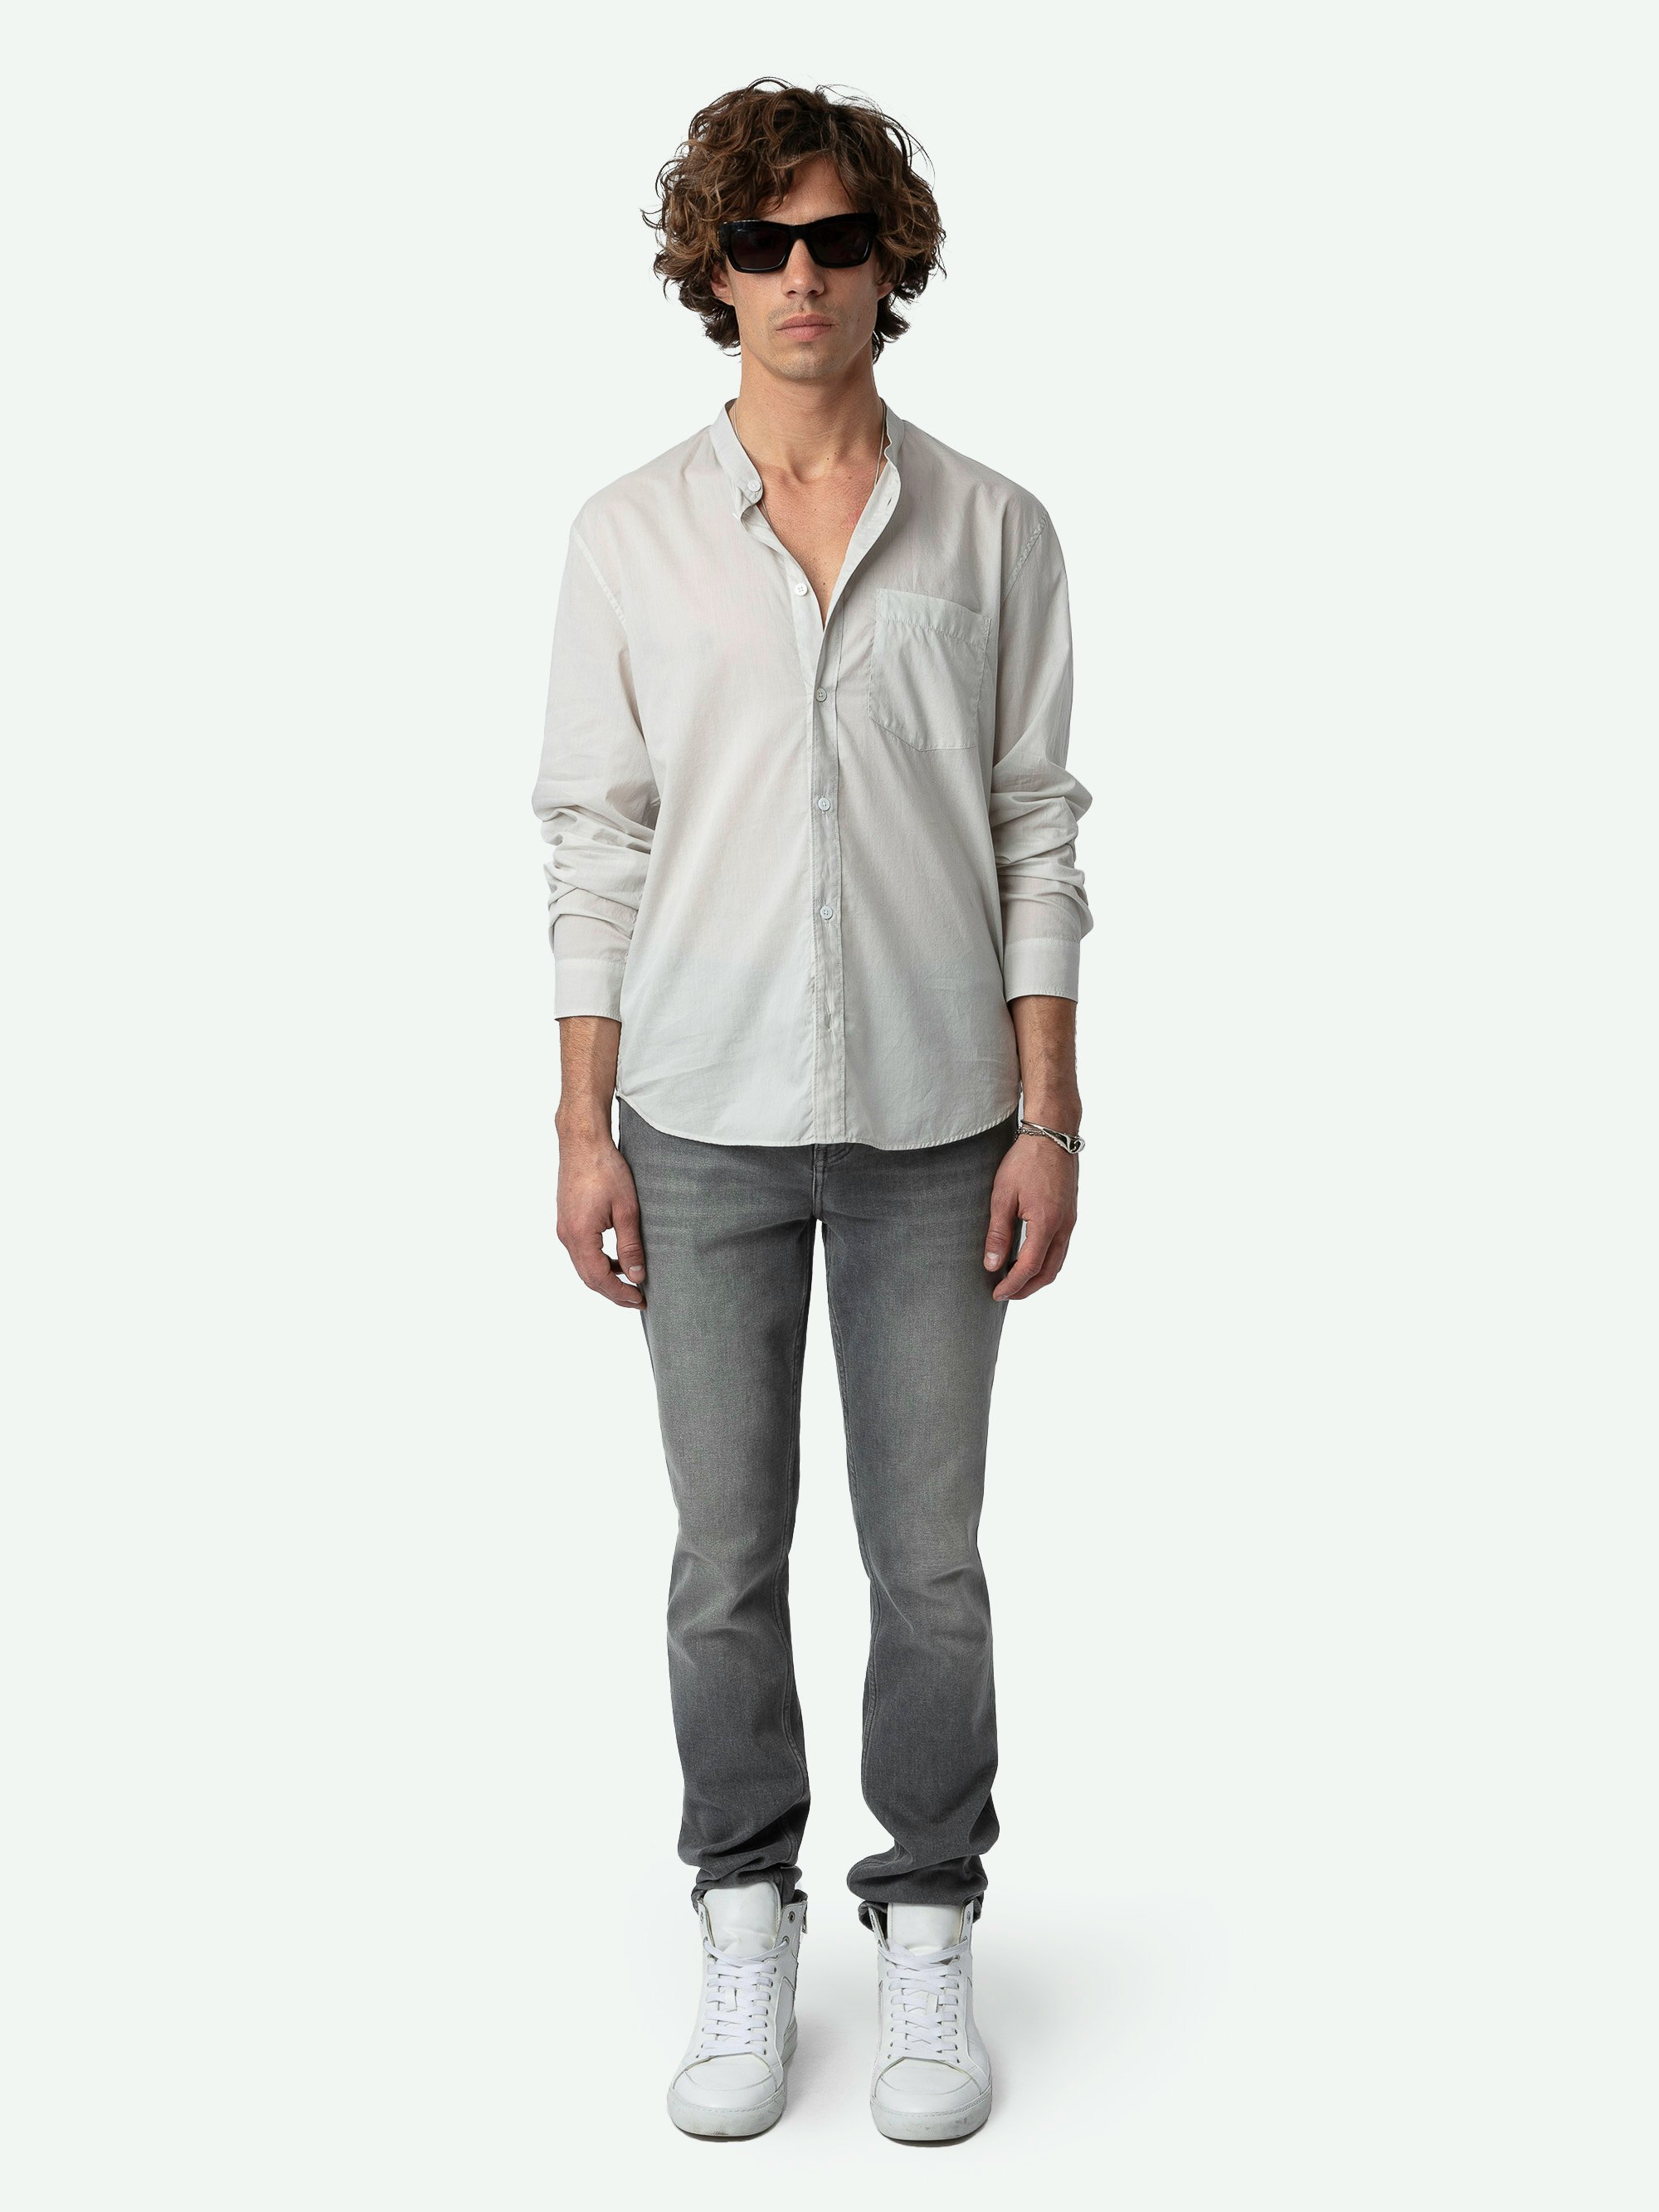 Thibault Shirt - Long-sleeved round neck cotton voile shirt with pocket.